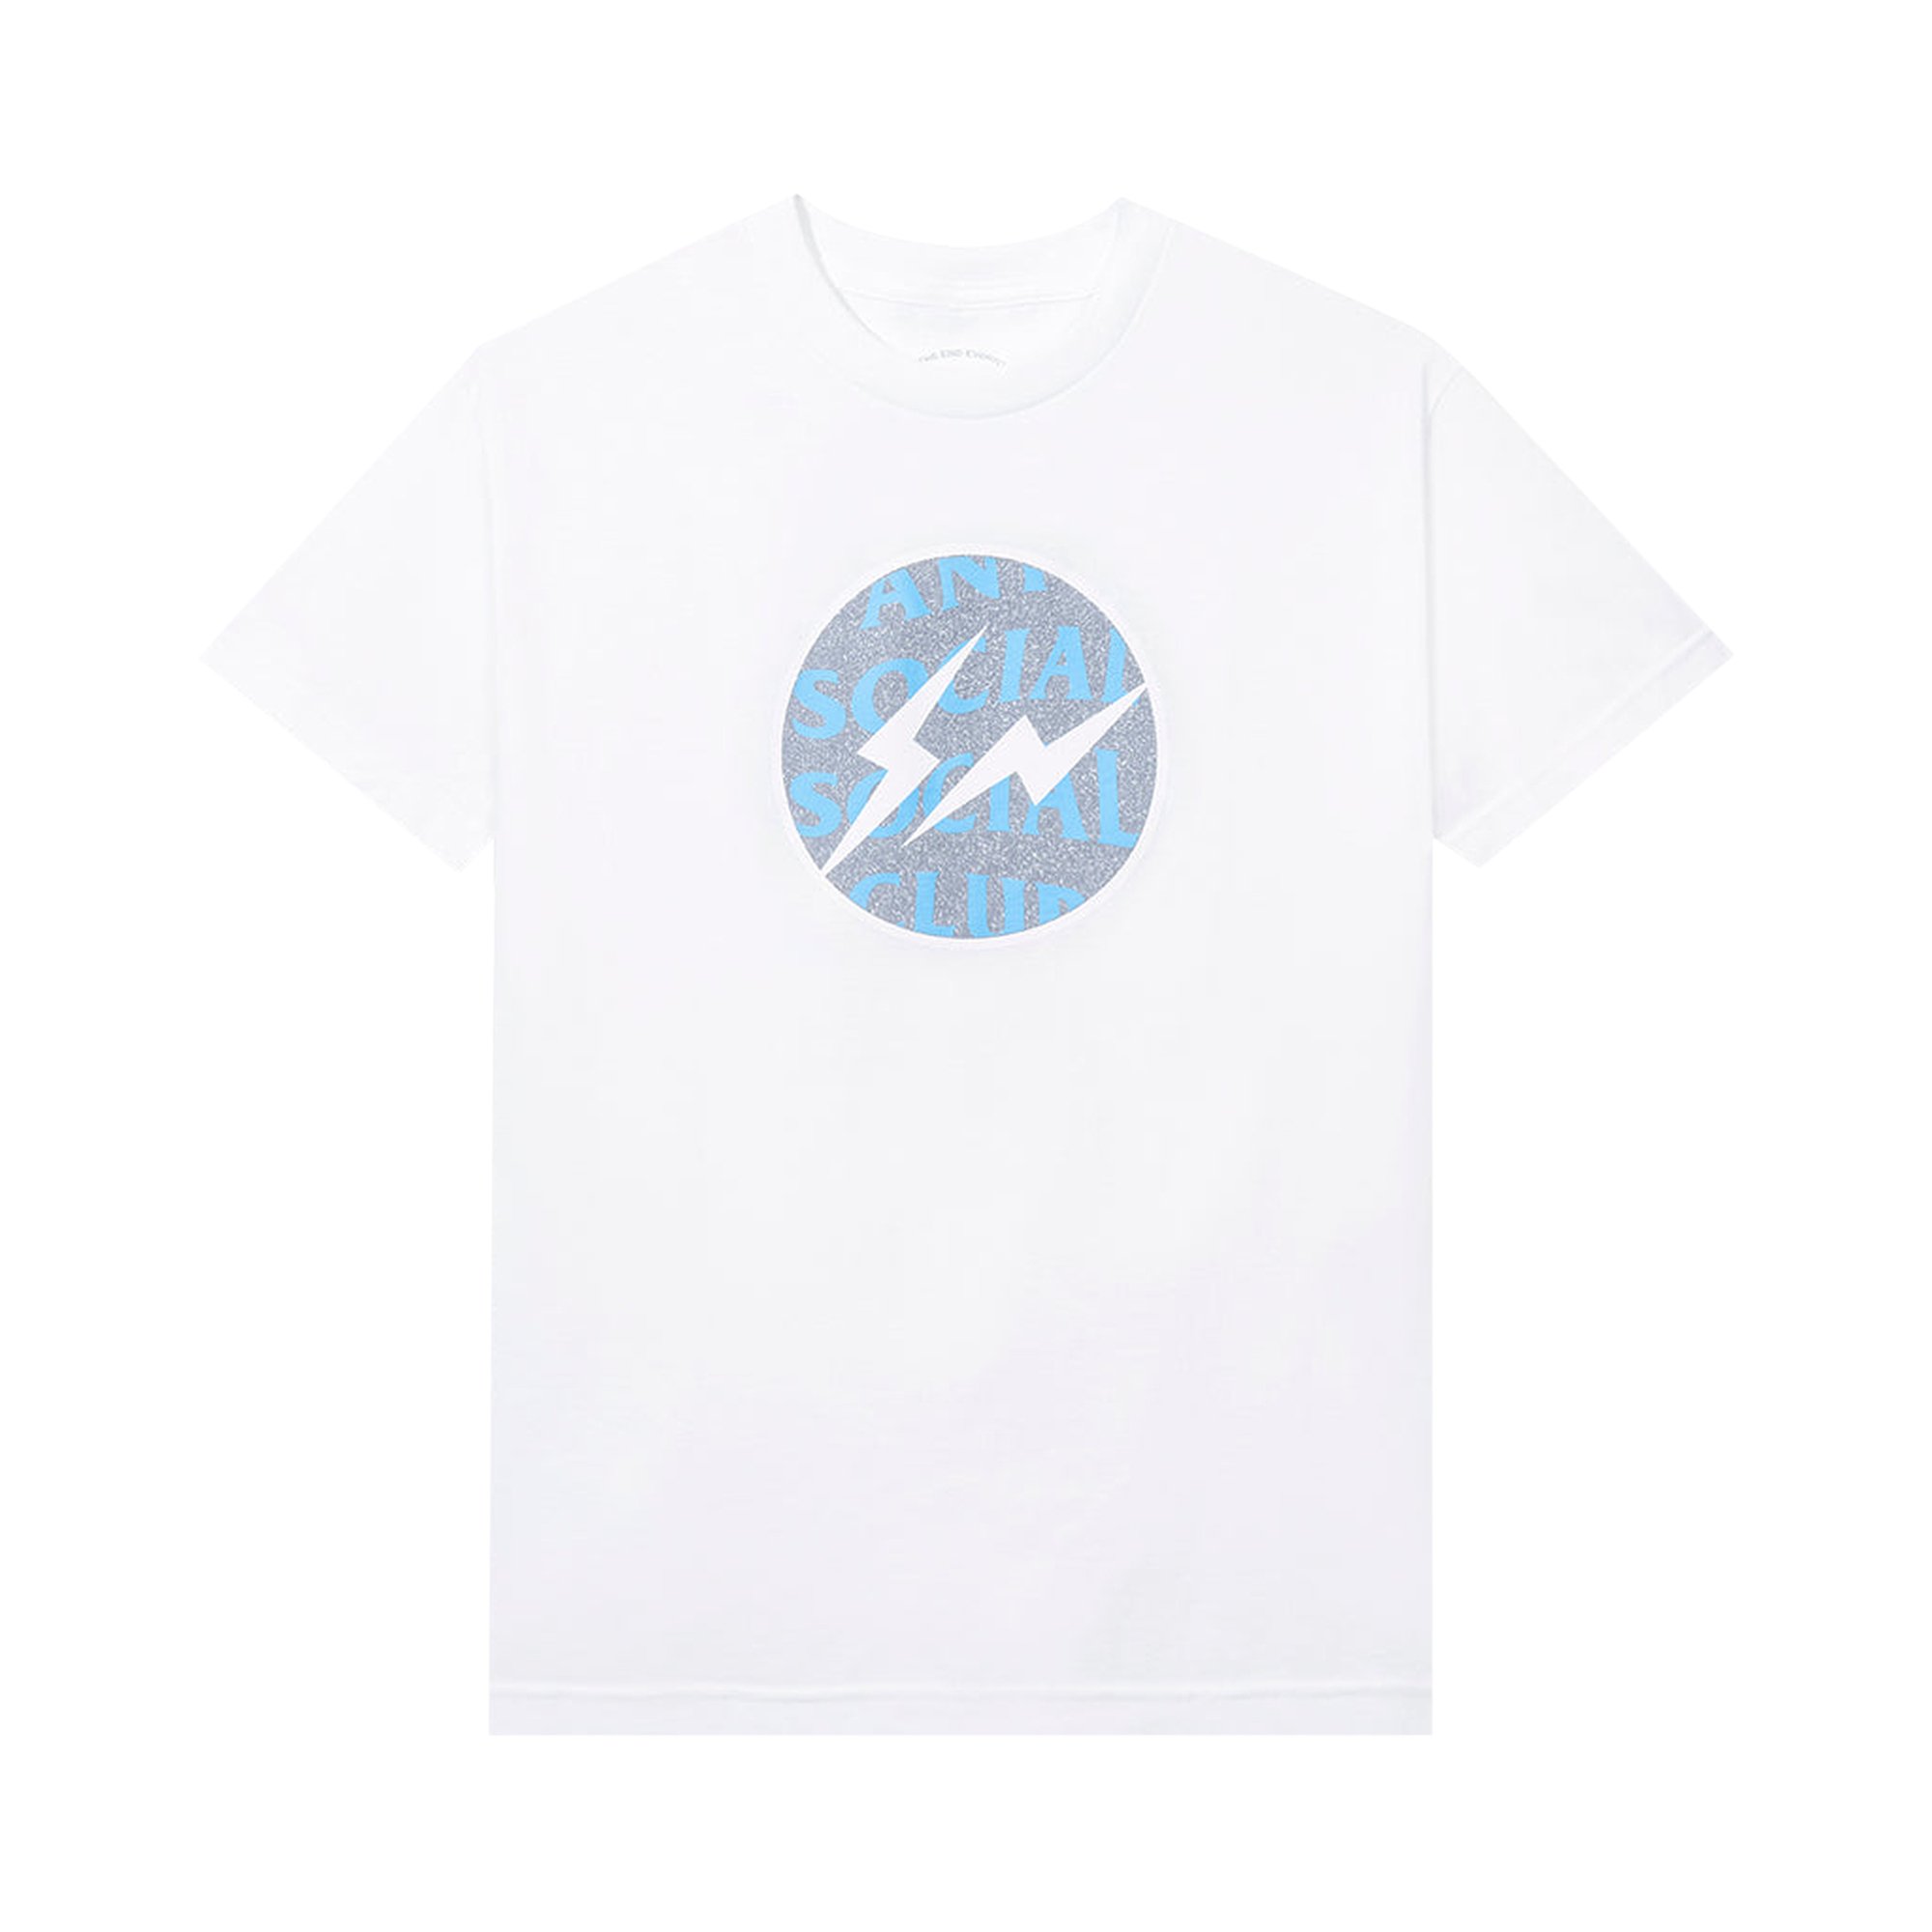 Buy Anti Social Social Club x Fragment Called Interference Tee